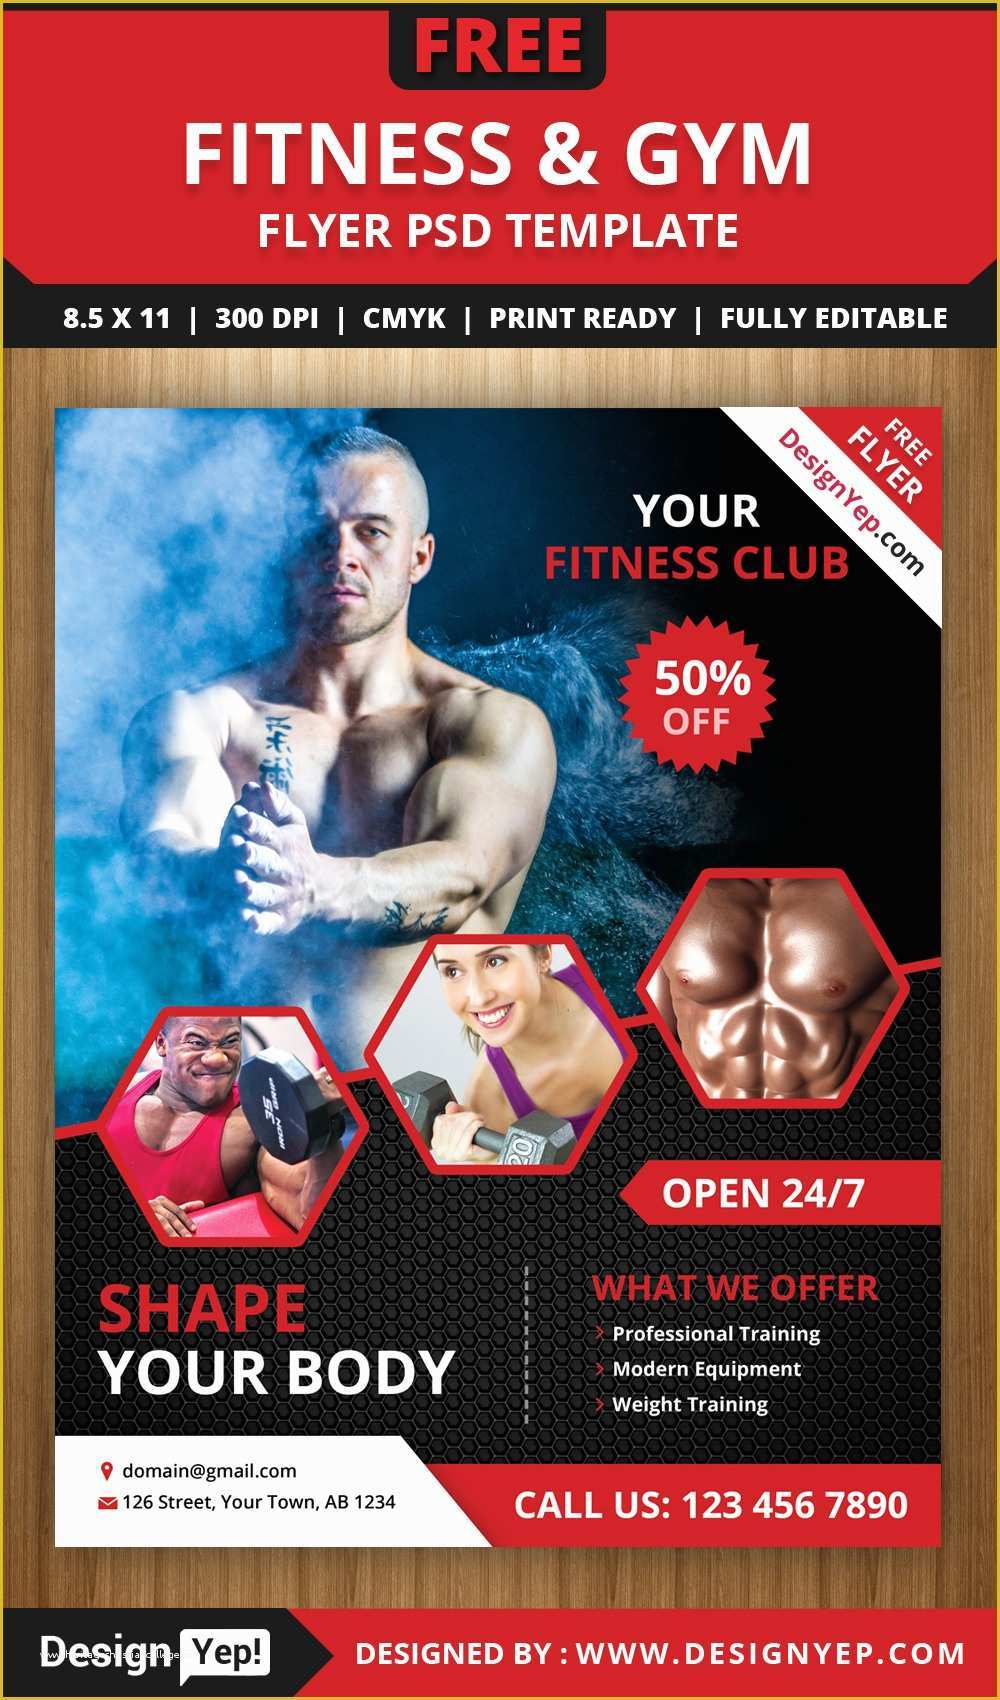 Gym Flyer Template Free Of Free Fitness and Gym Flyer Psd Template Designyep